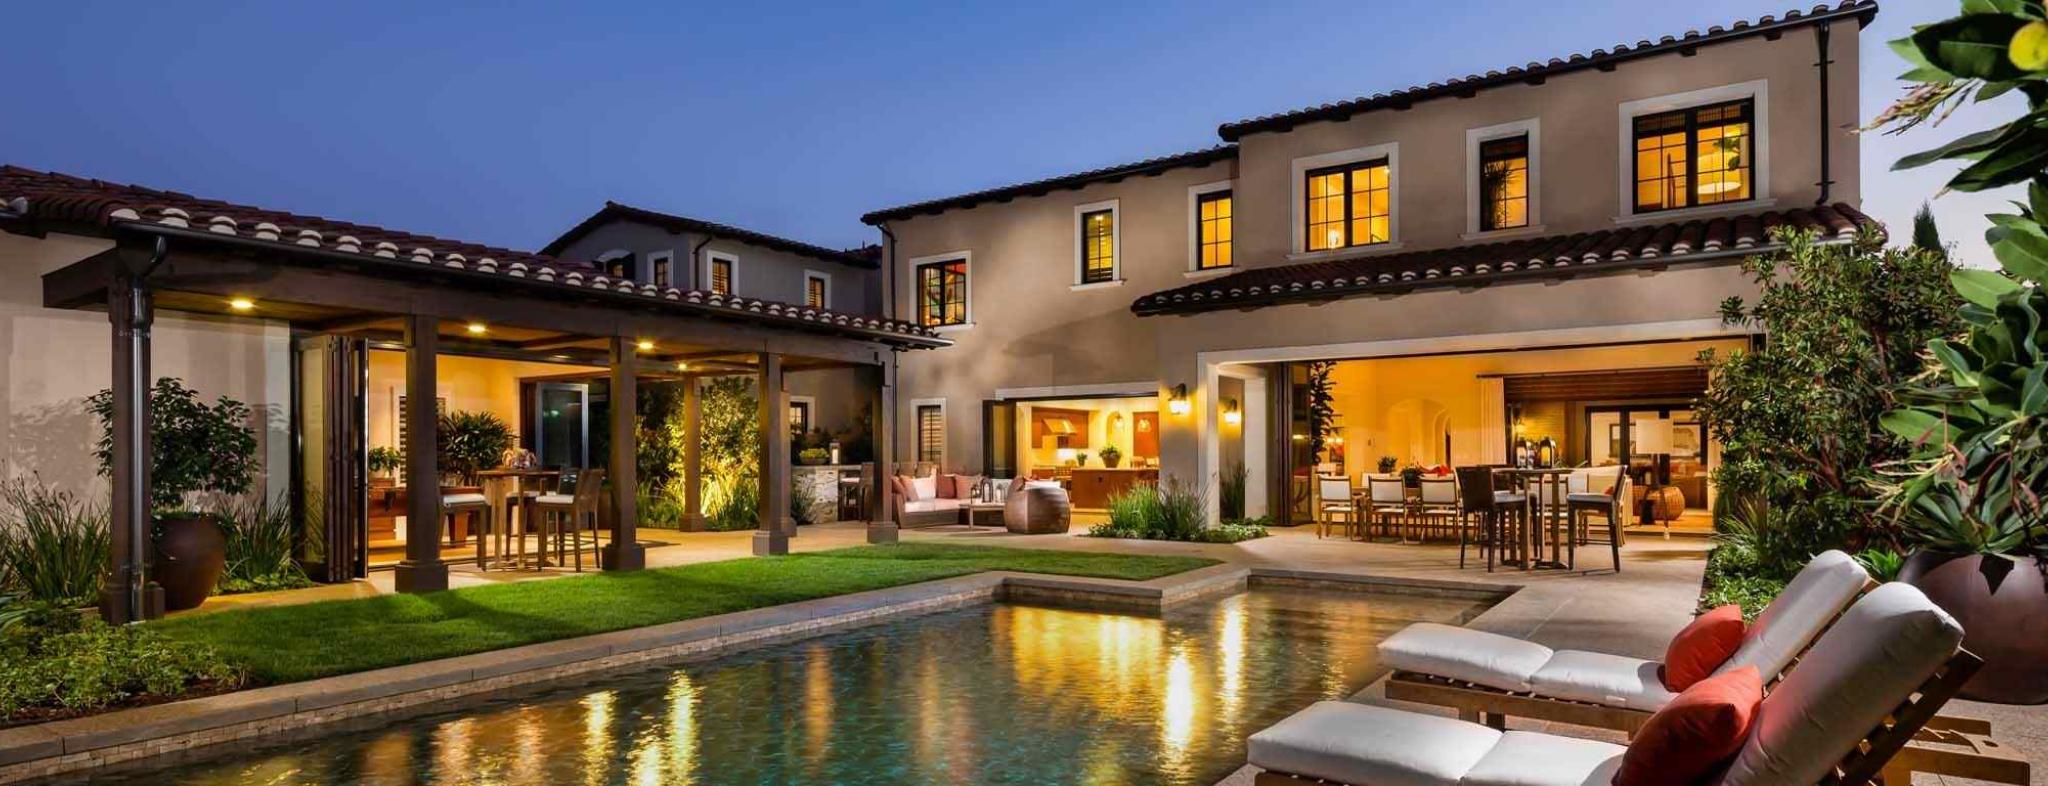 The New Home Company Reports $50 Million in Sales at Two Orchard Hills Neighborhoods in Irvine, California